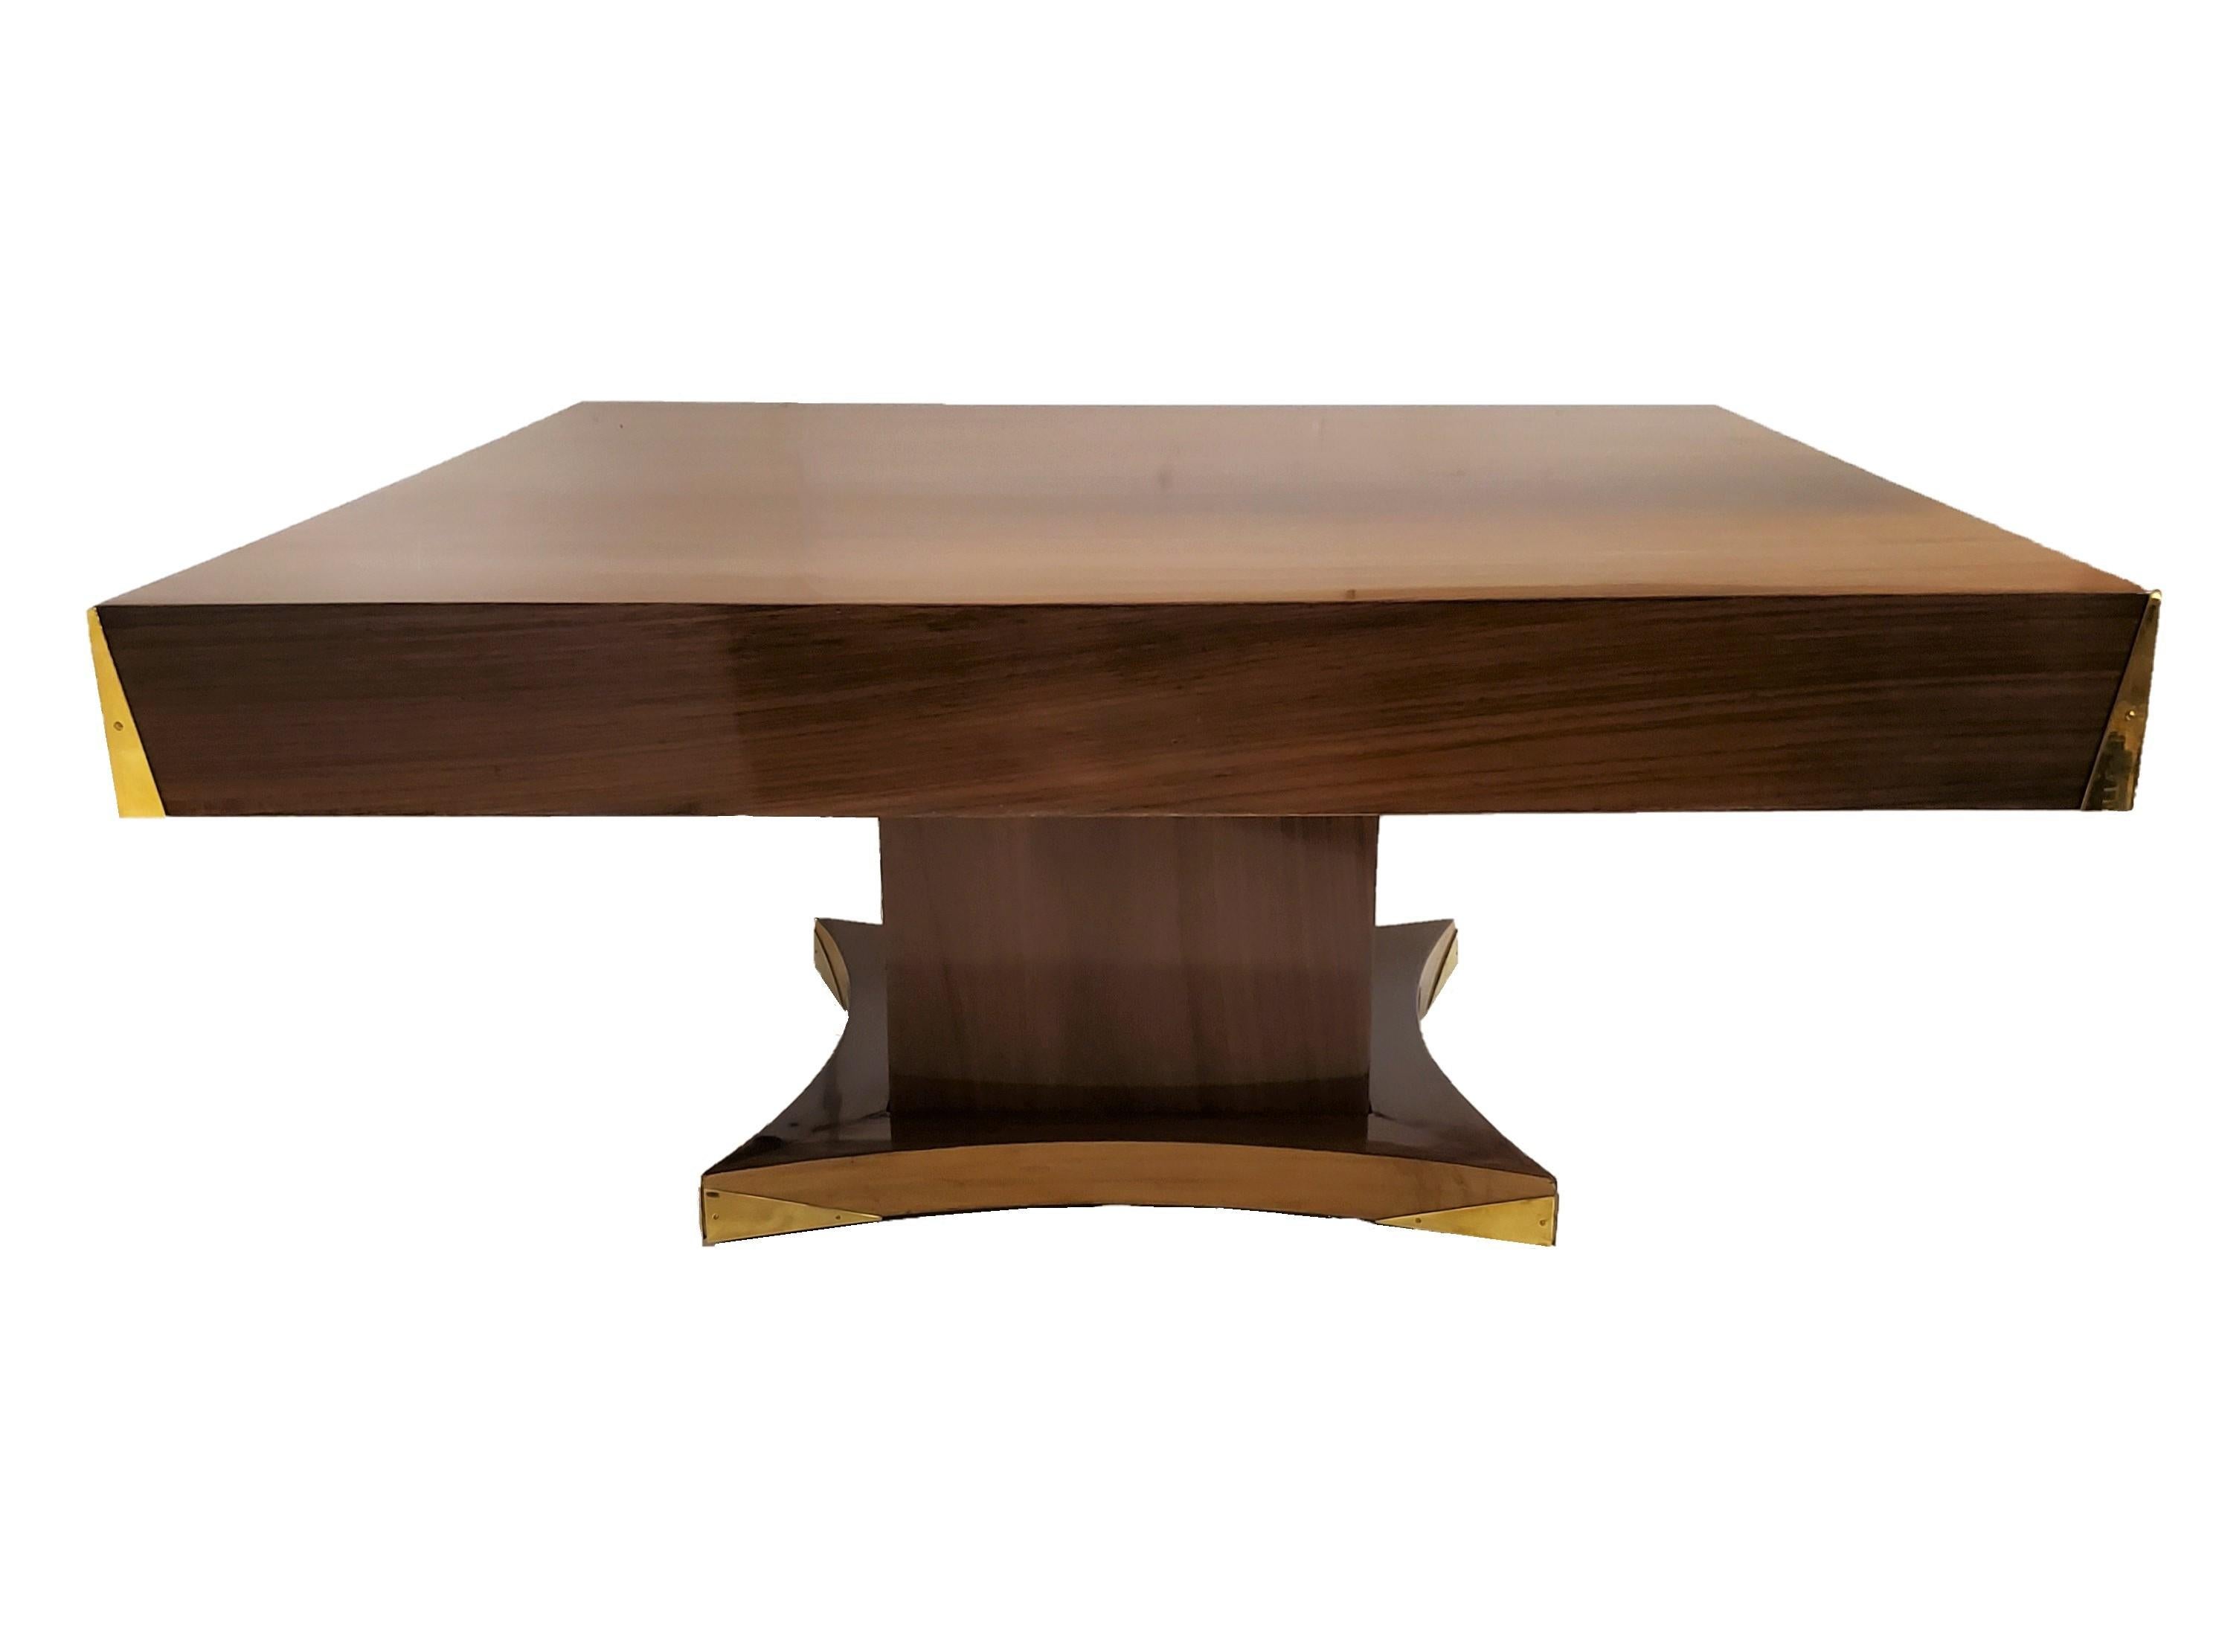 An elegant and imposing cubist design palisander and brass Art Deco square coffee table with square central shaft ending with a radius shape lighter wood sub-base surround. 
Beautifully grained palisander enhances the top surface while the entirety